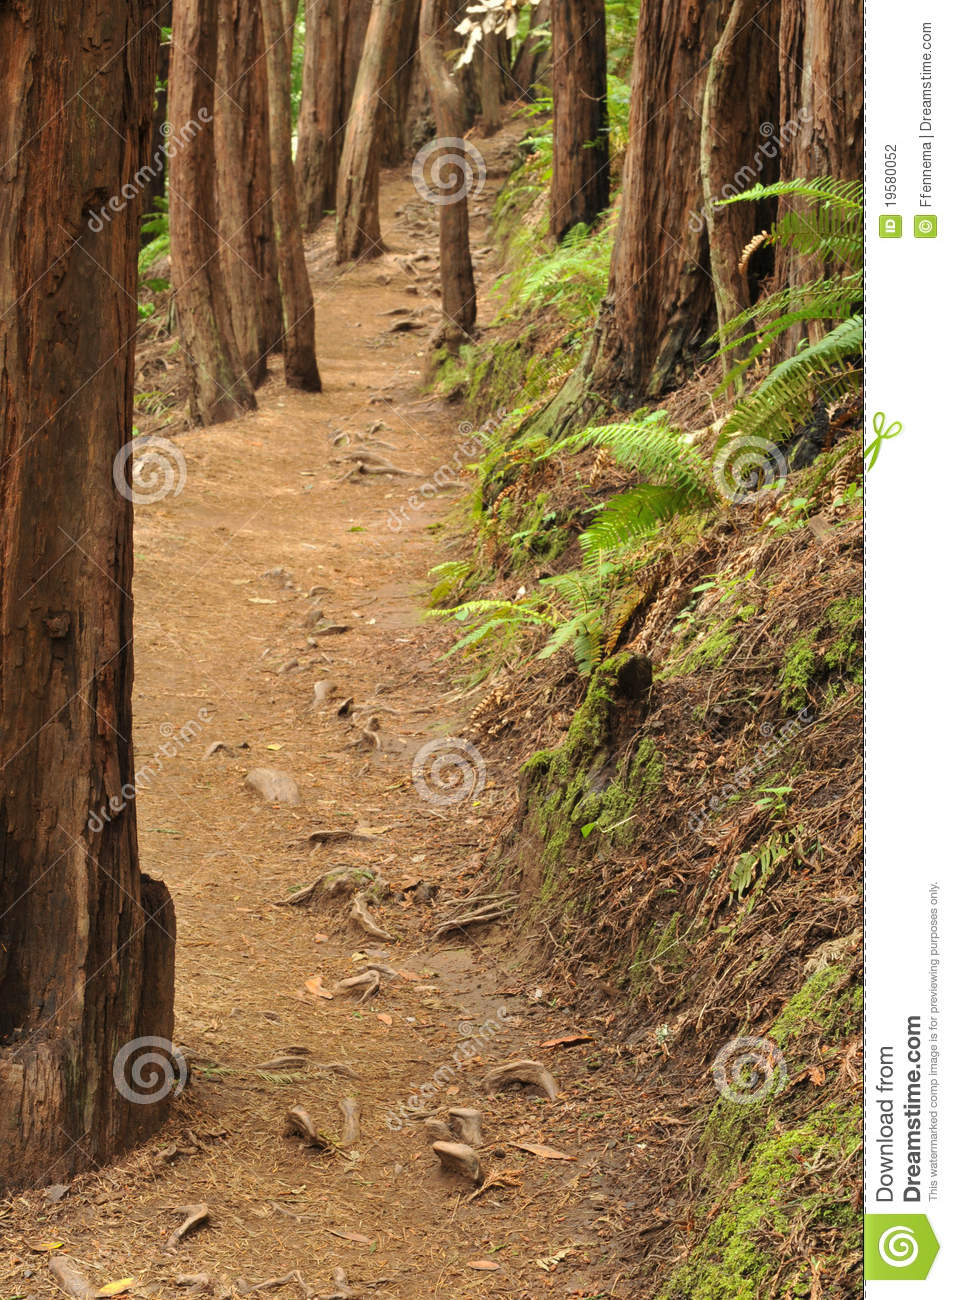 Dirt Trail Through The Woods With Bushes Stock Photography   Image    